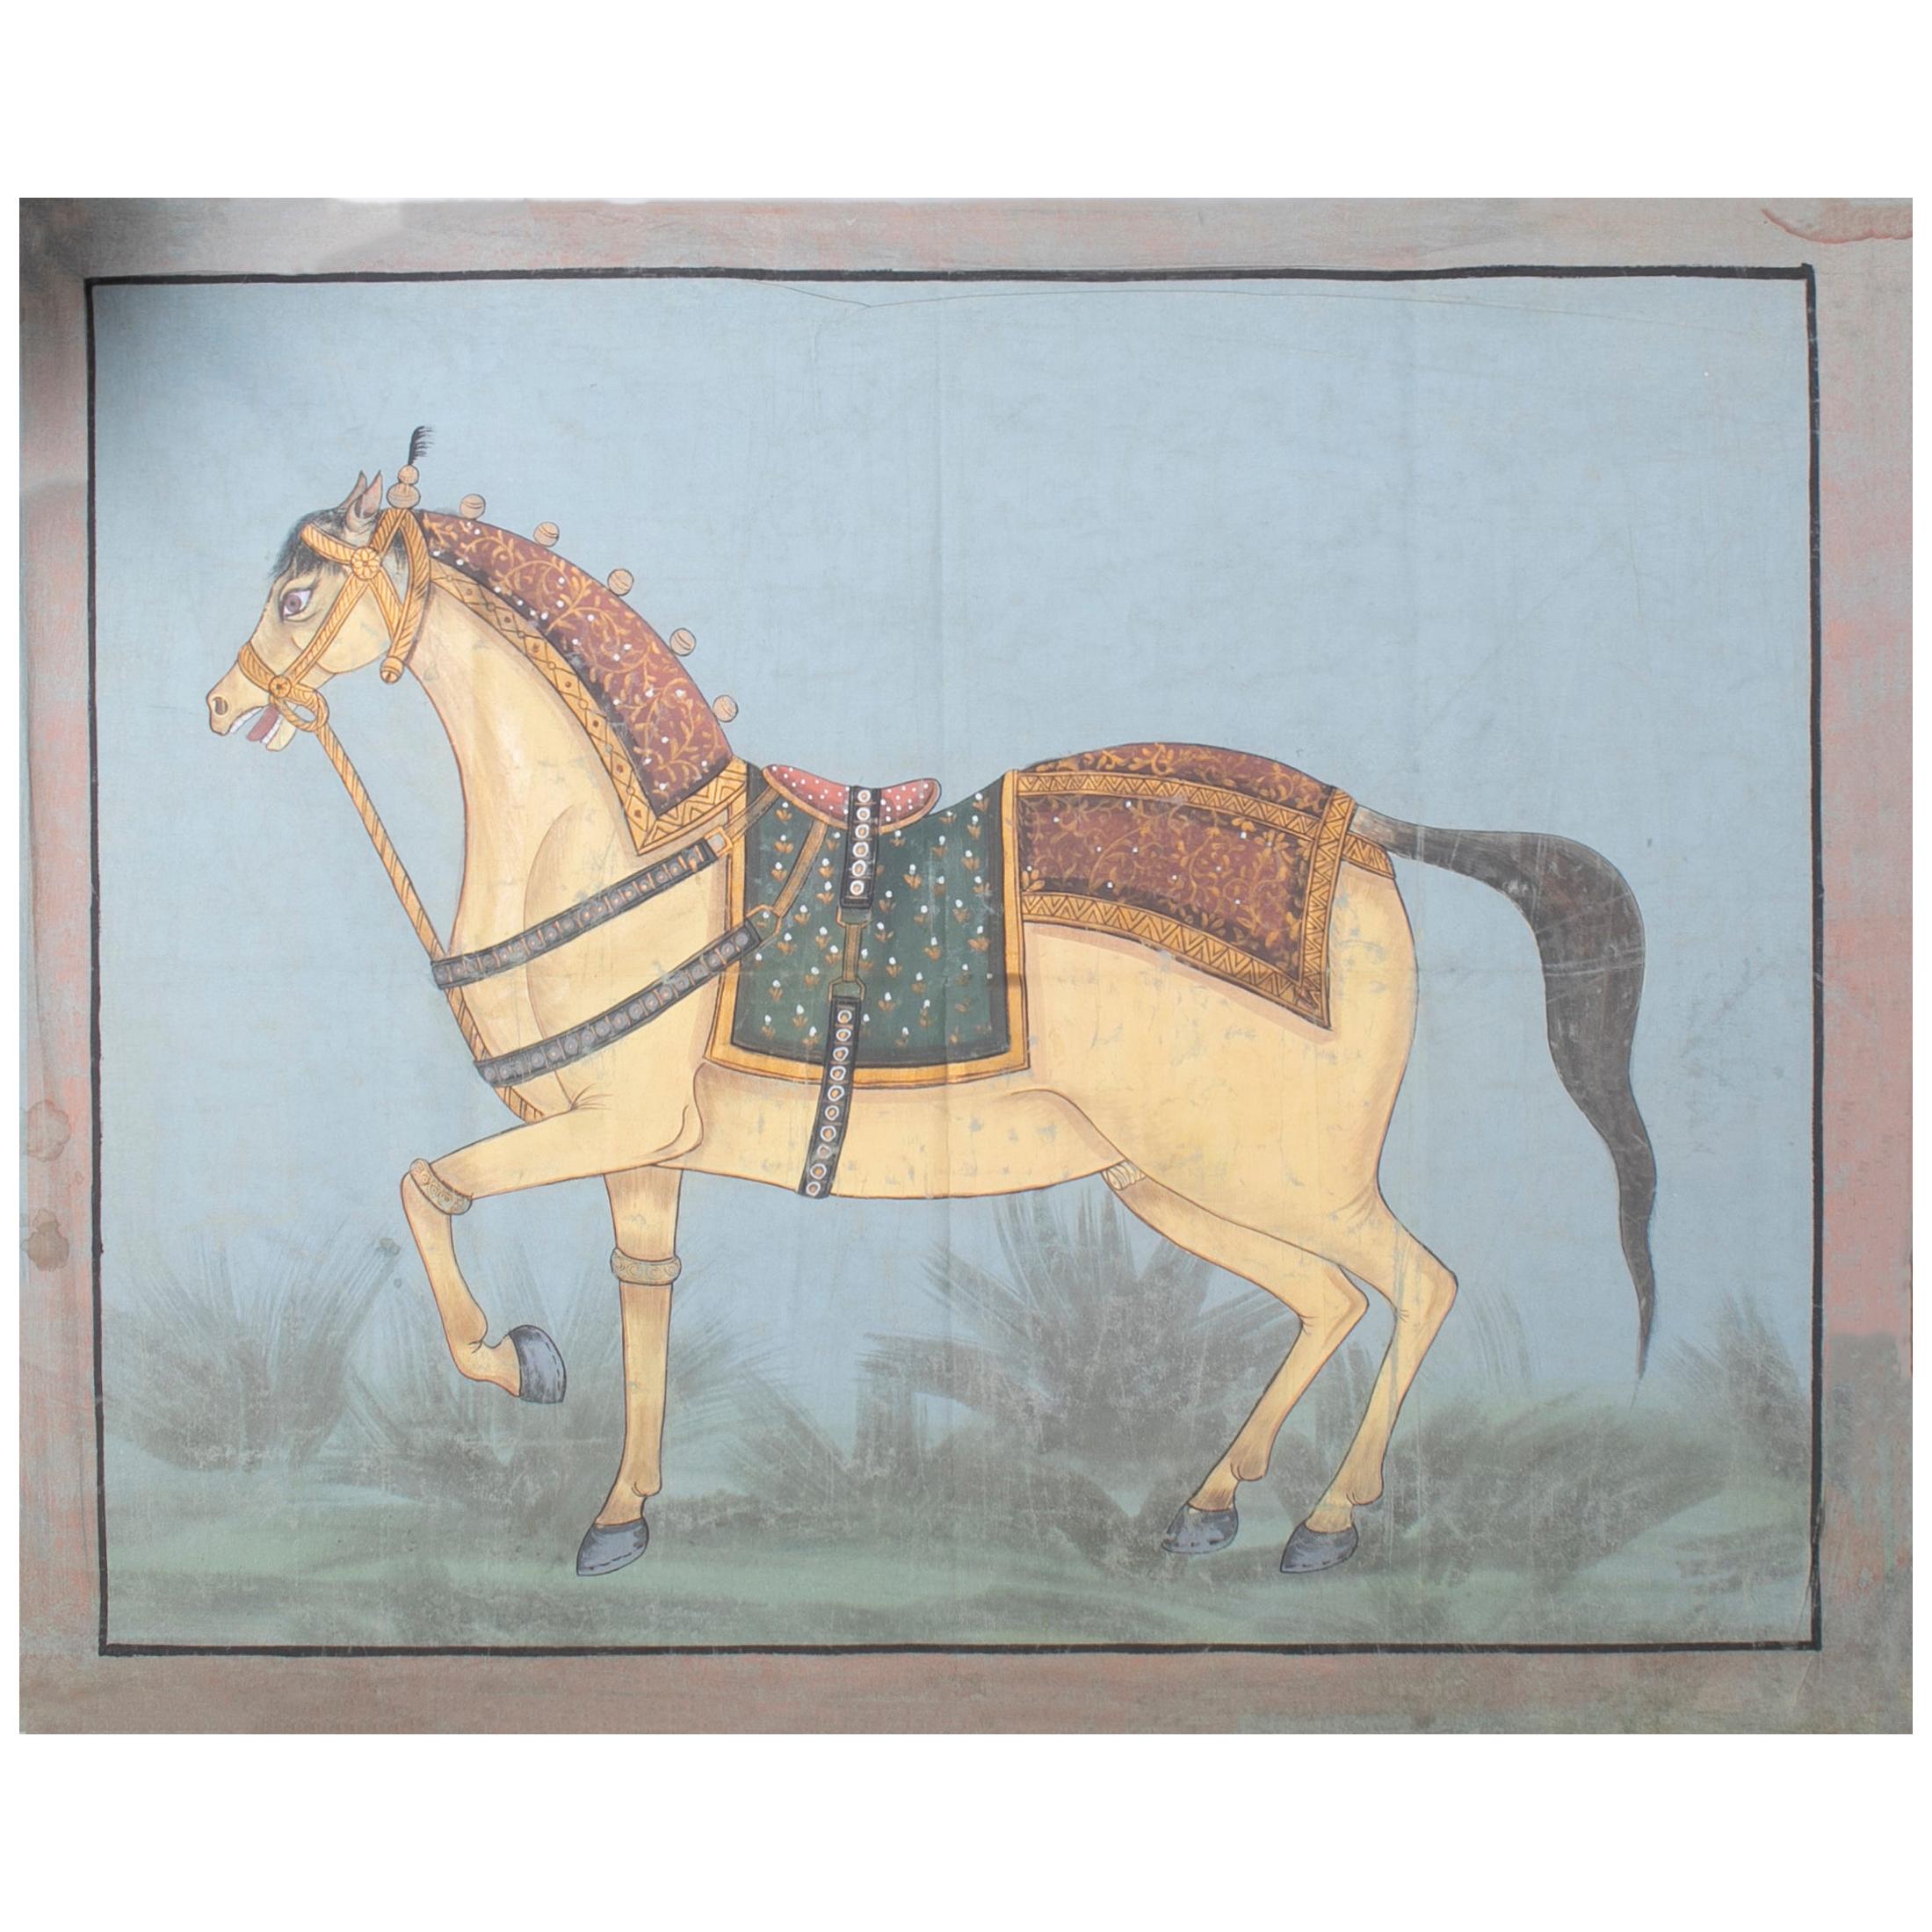 1970s Indian Painting "Walking Horse" Oil on Canvas, Jaime Parlade Design